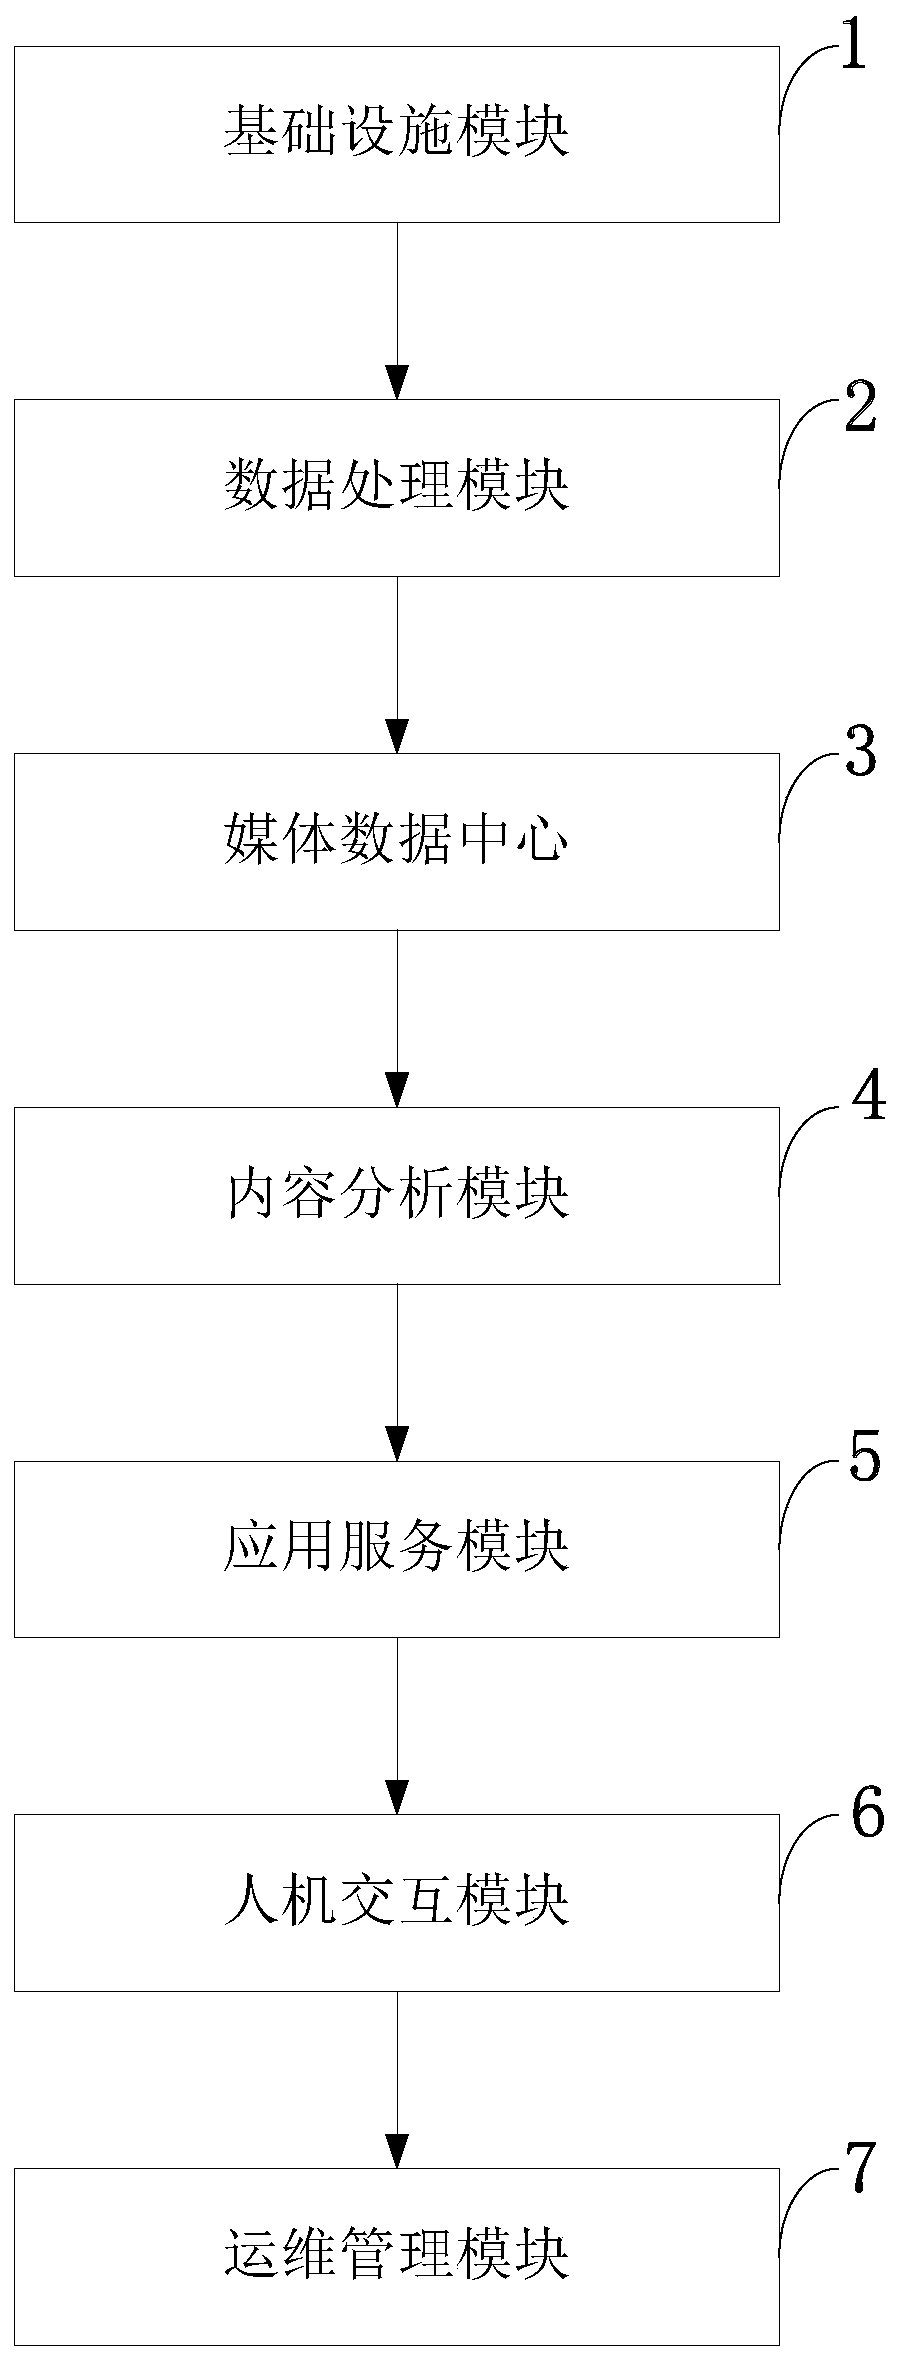 Internet media content safety monitoring system and method based on artificial intelligence